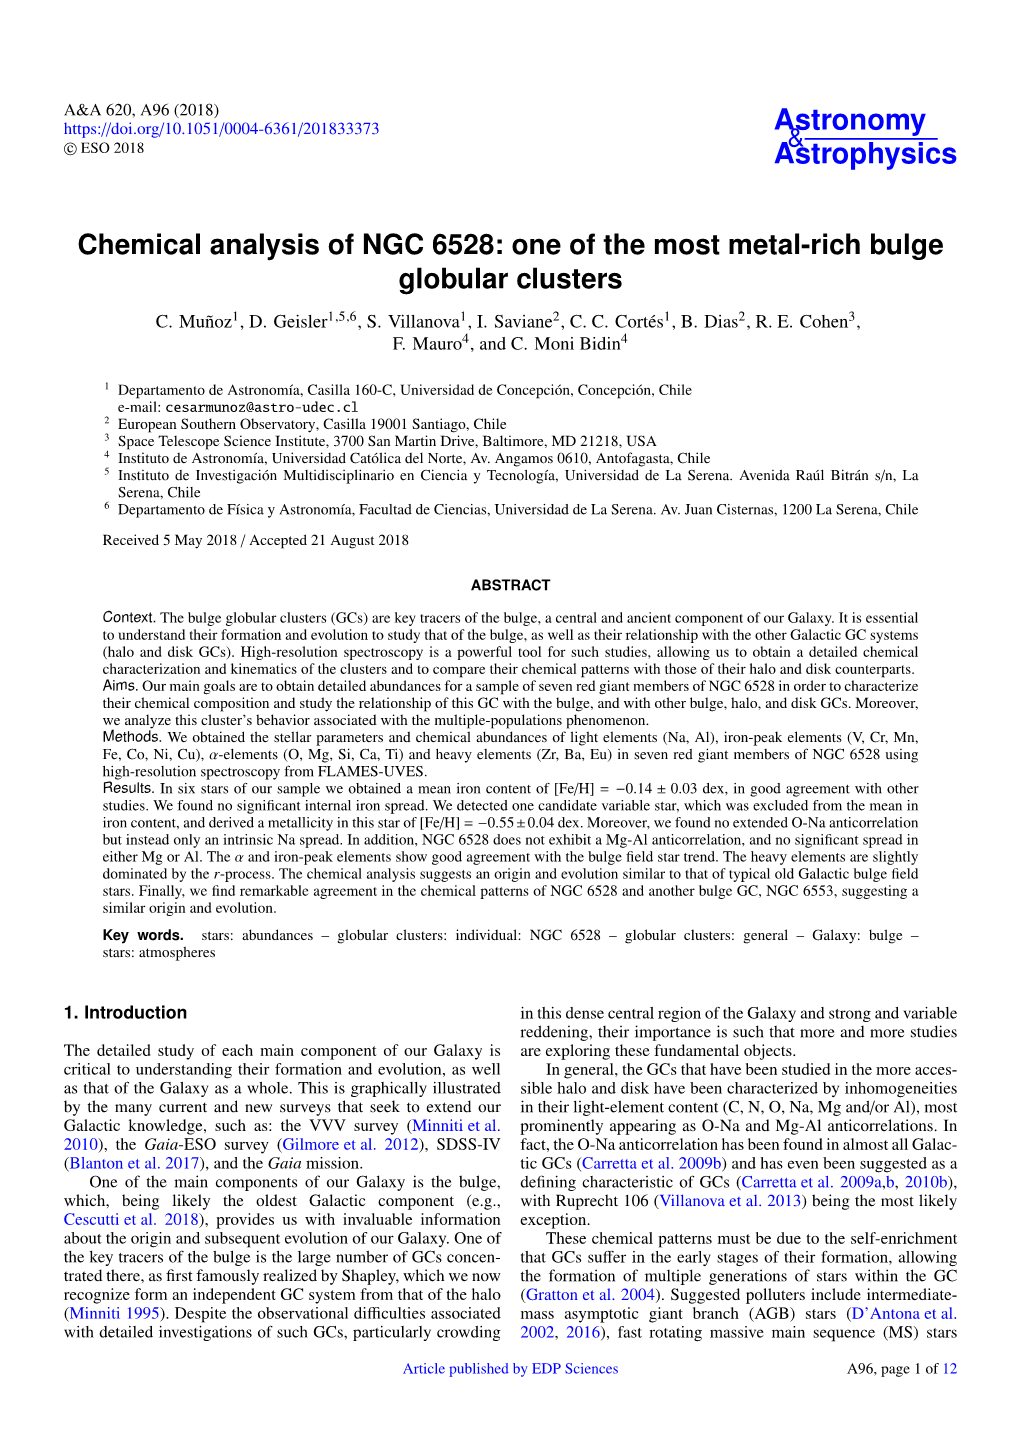 Chemical Analysis of NGC 6528: One of the Most Metal-Rich Bulge Globular Clusters C